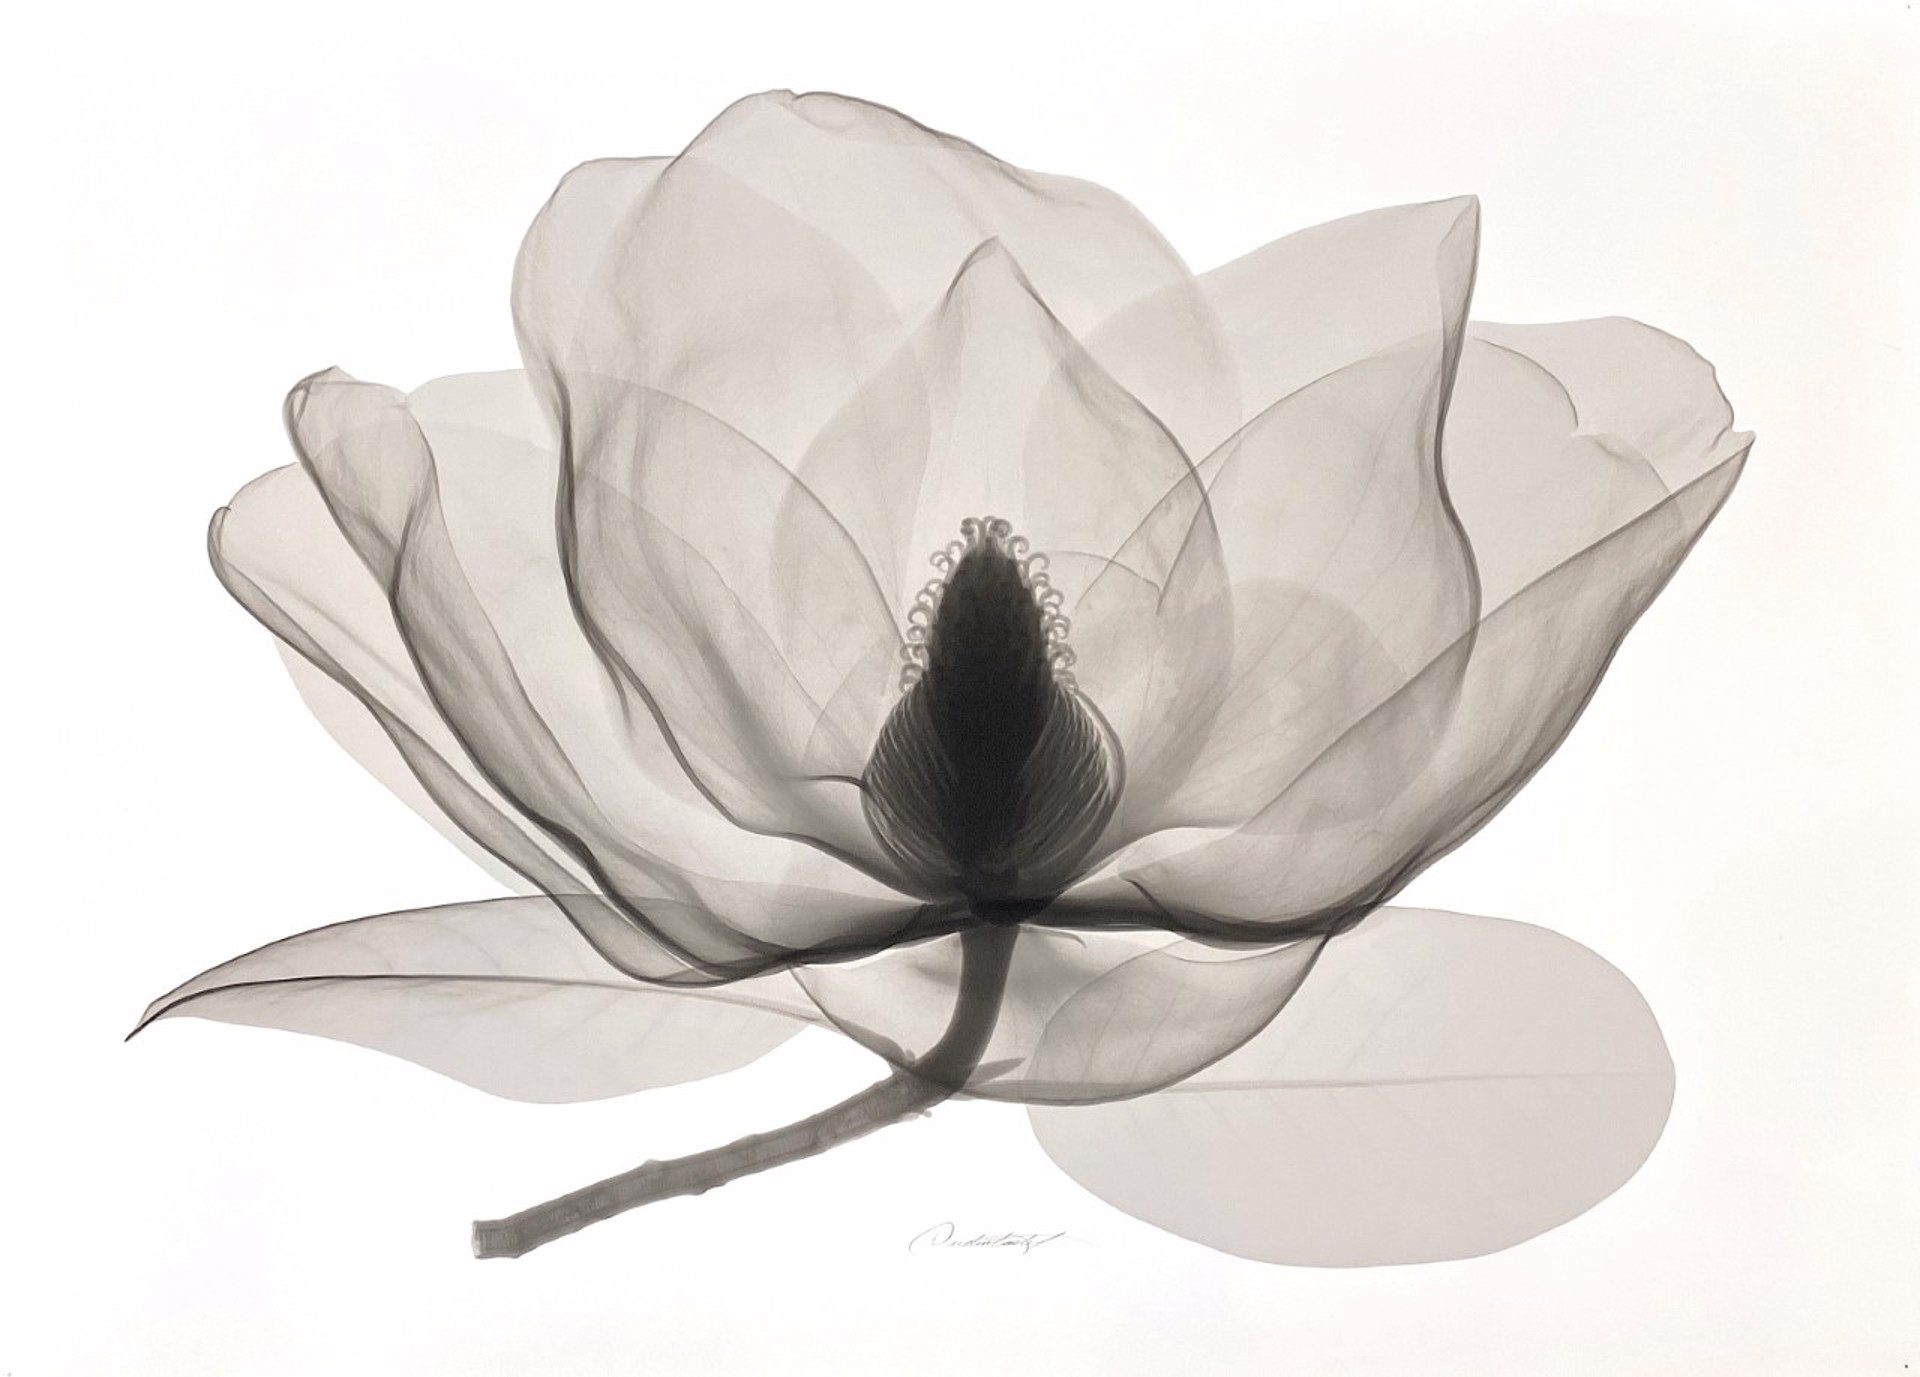 Southern Magnolia by Don Dudenbostel